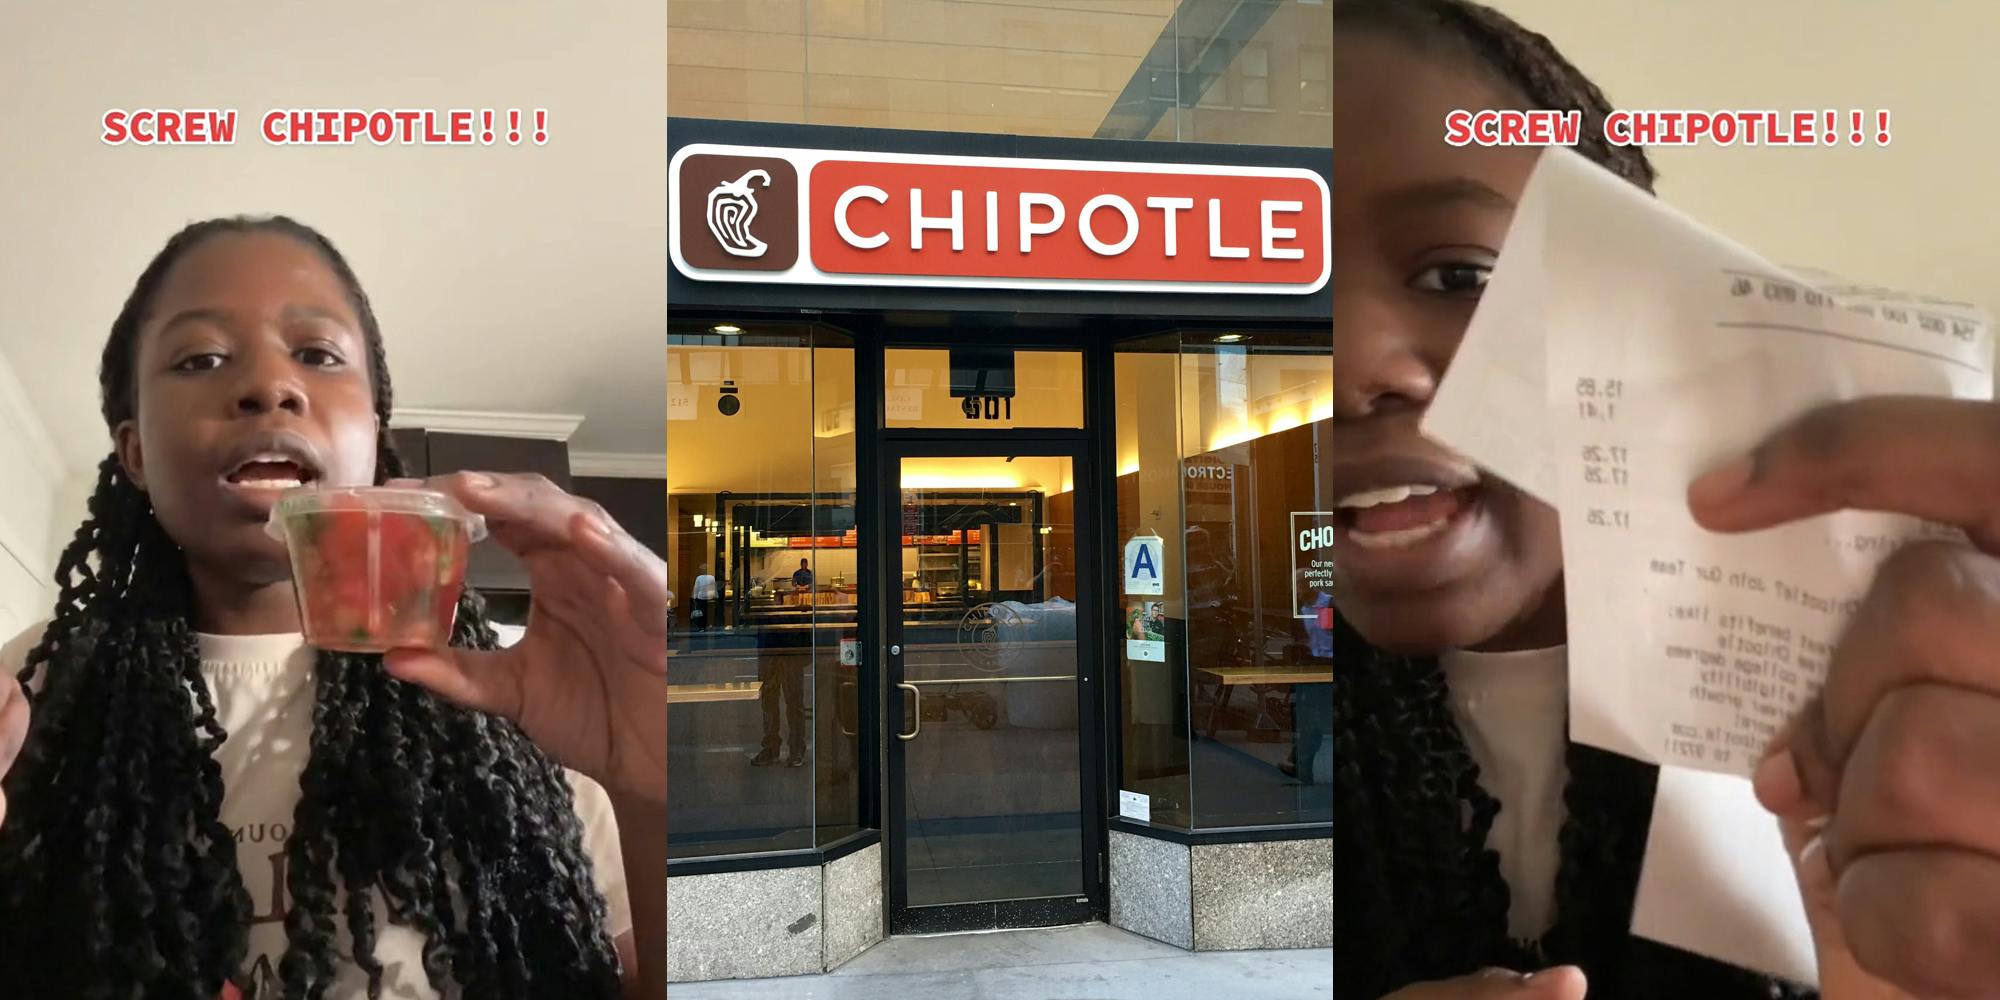 customer speaking holding container from Chipotle with caption "SCREW CHIPOTLE!!!" (l) Chipotle sign on building with sidewalk (c) customer holding receipt with caption "SCREW CHIPOTLE!!!" (r)